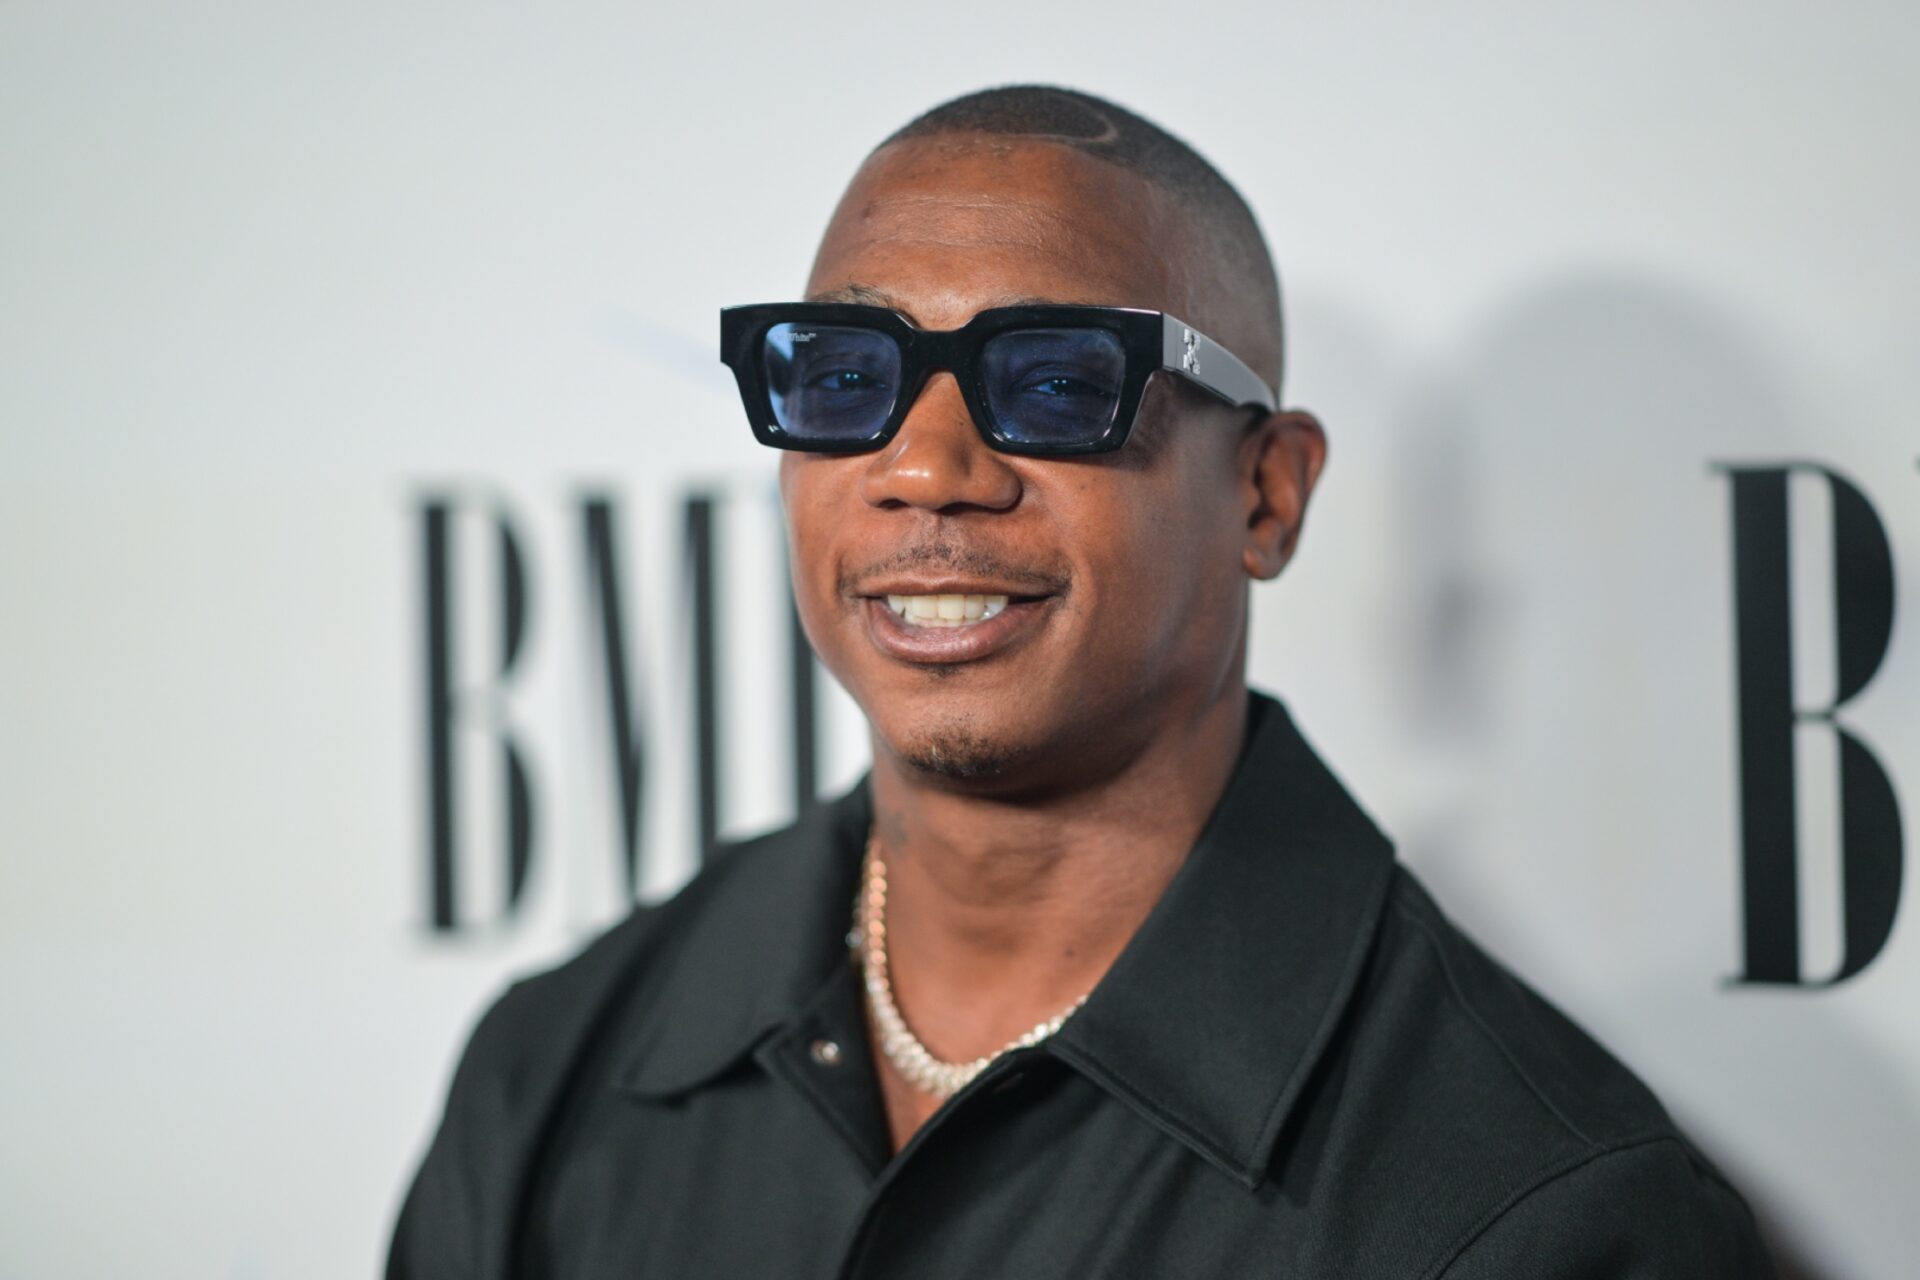 Uk Authorities Deny Ja Rule Entry Ahead Of Scheduled Tour, Yours Truly, The Daily Show, February 29, 2024